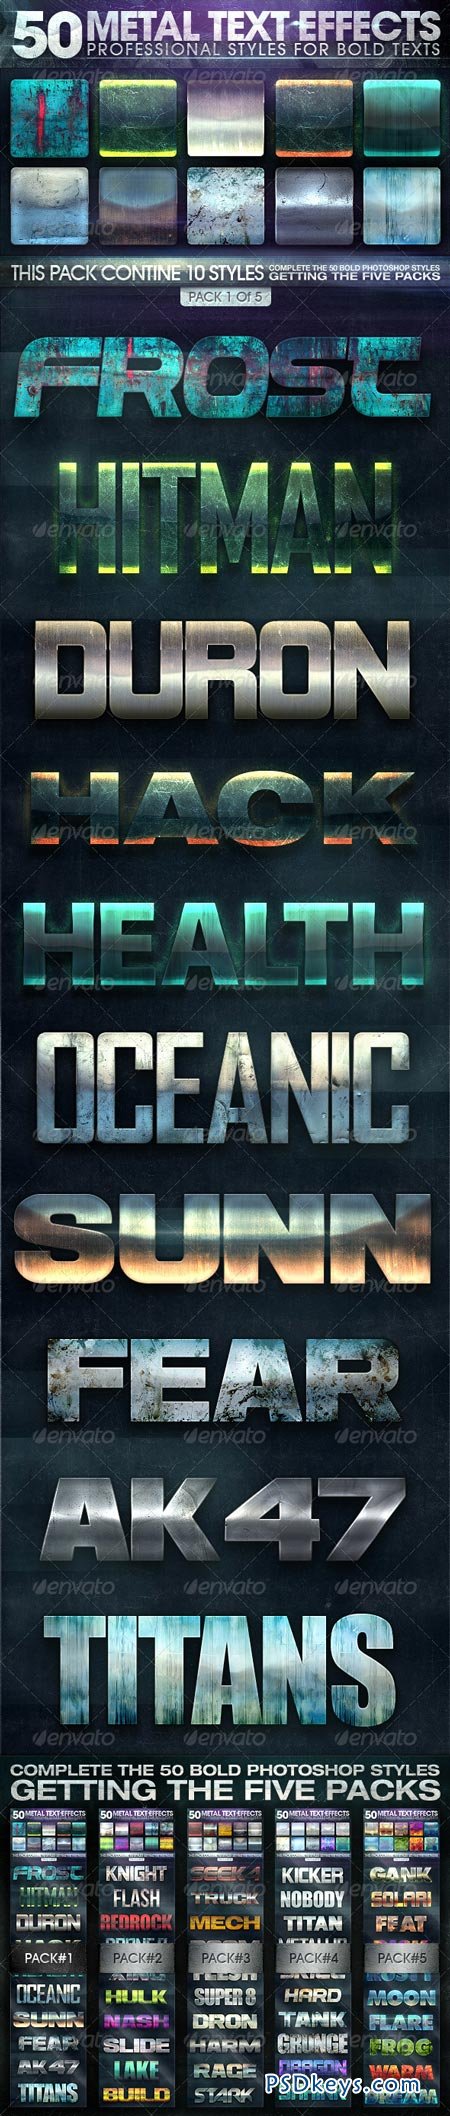 50 Metal Text Effects 1 of 5 8344089